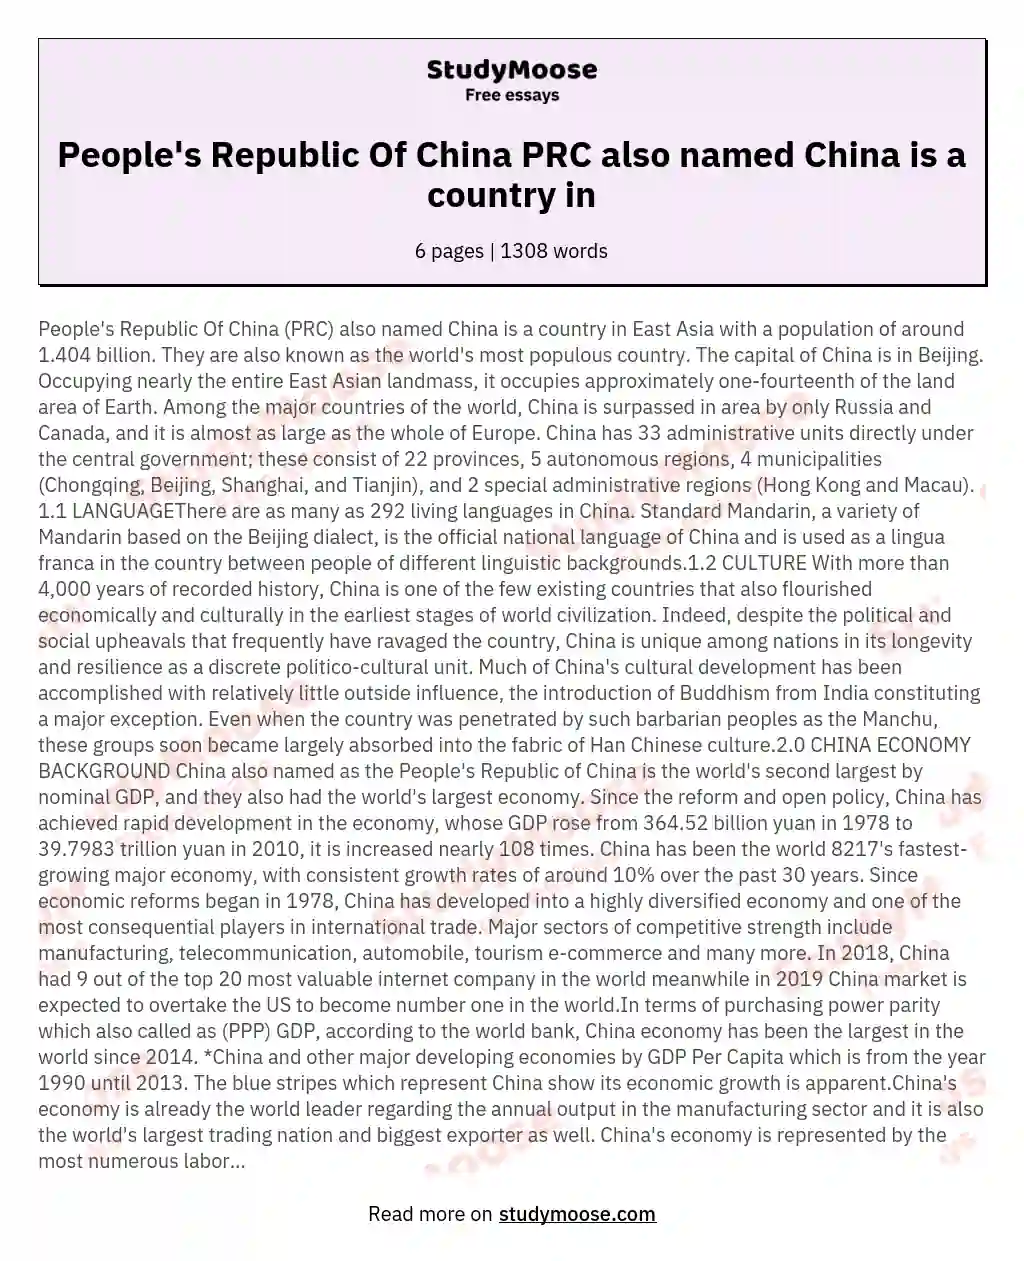 People's Republic Of China PRC also named China is a country in